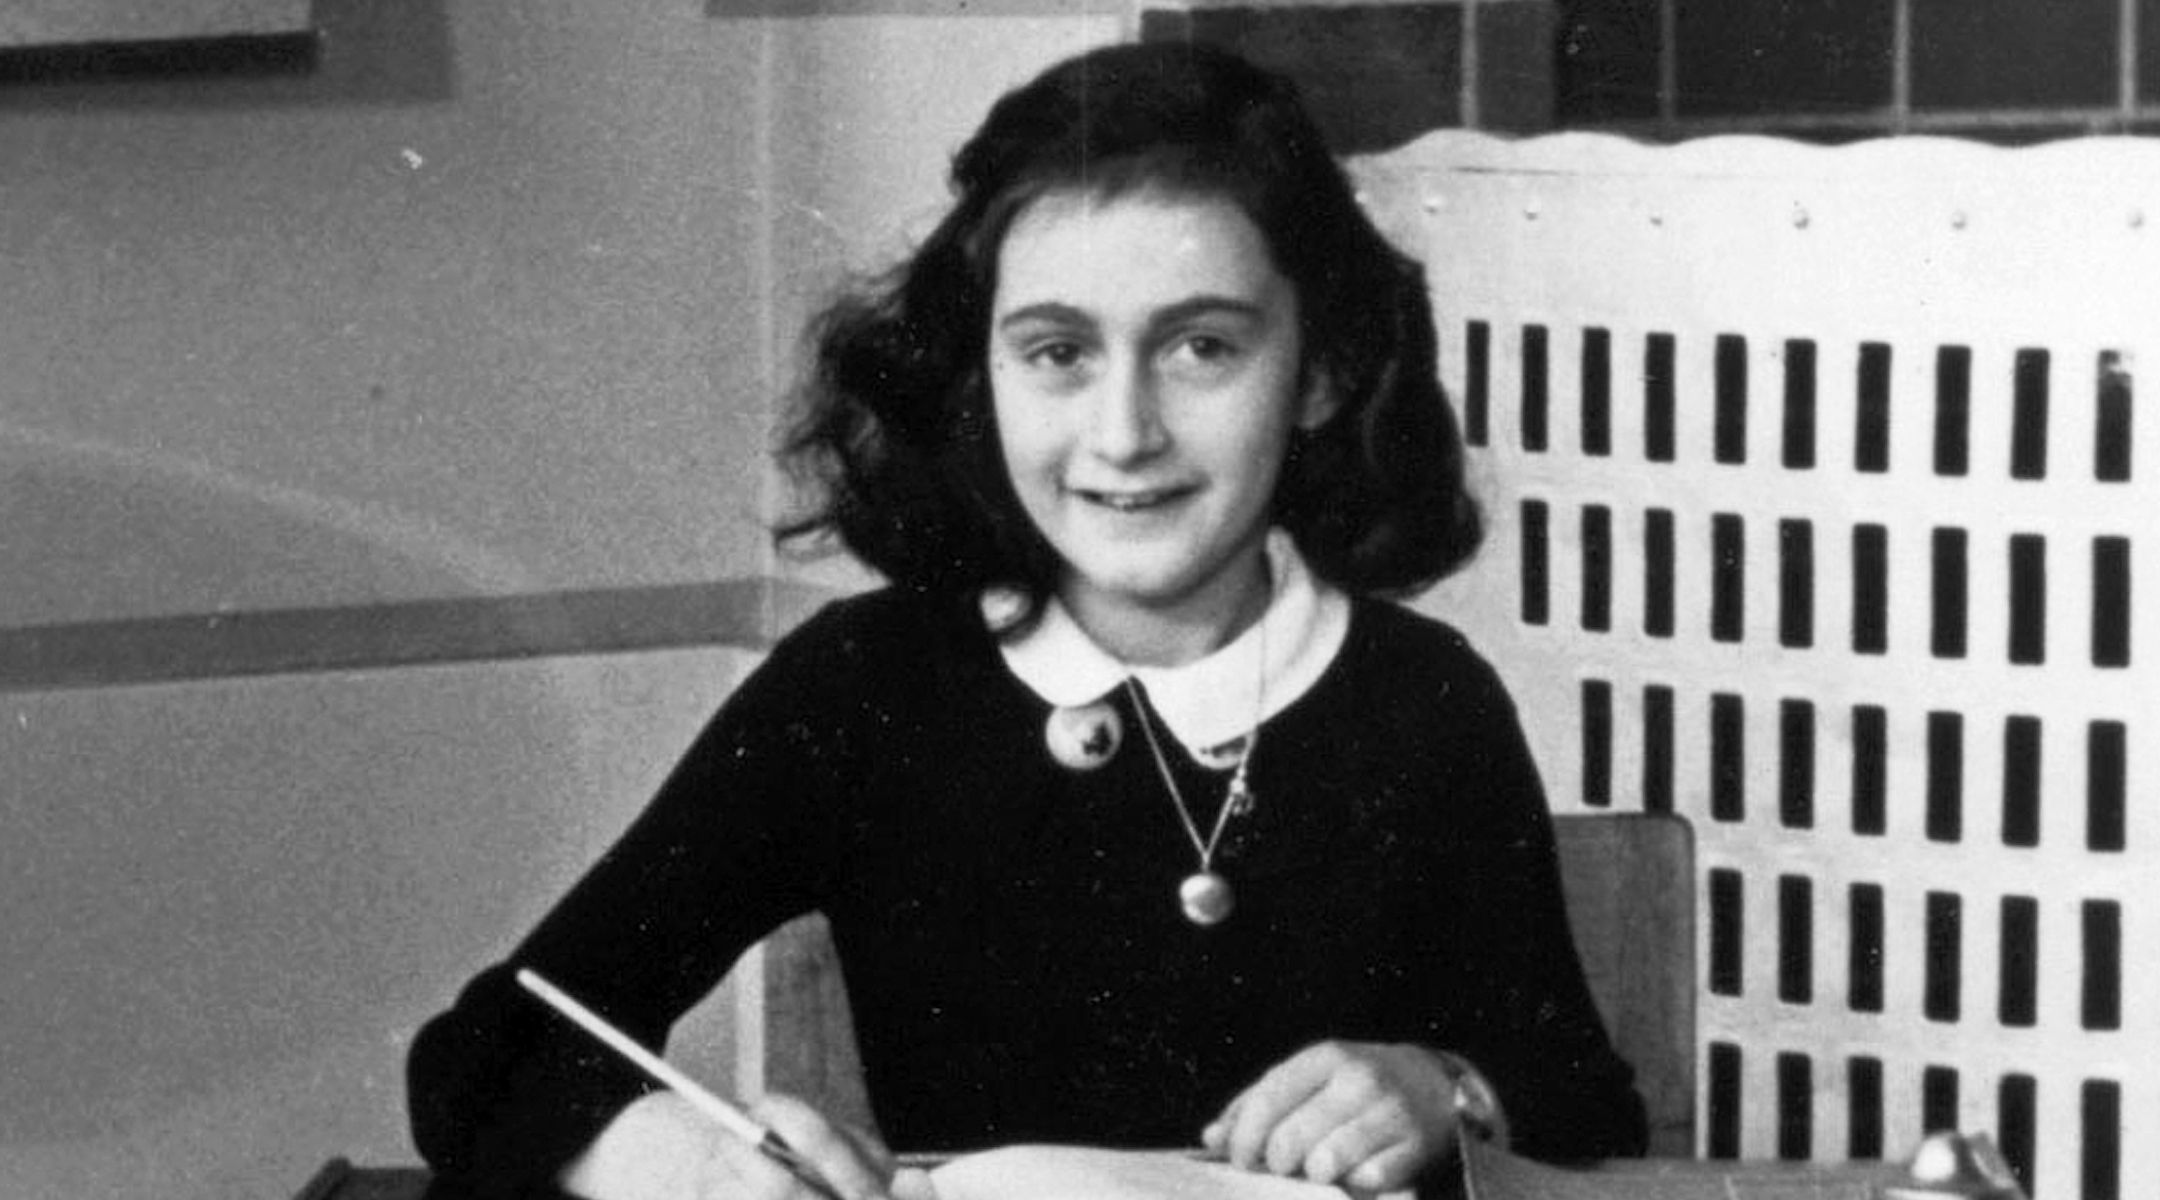 First Anal Young Girl - A new play shows the real Anne Frank (and now I like her ...